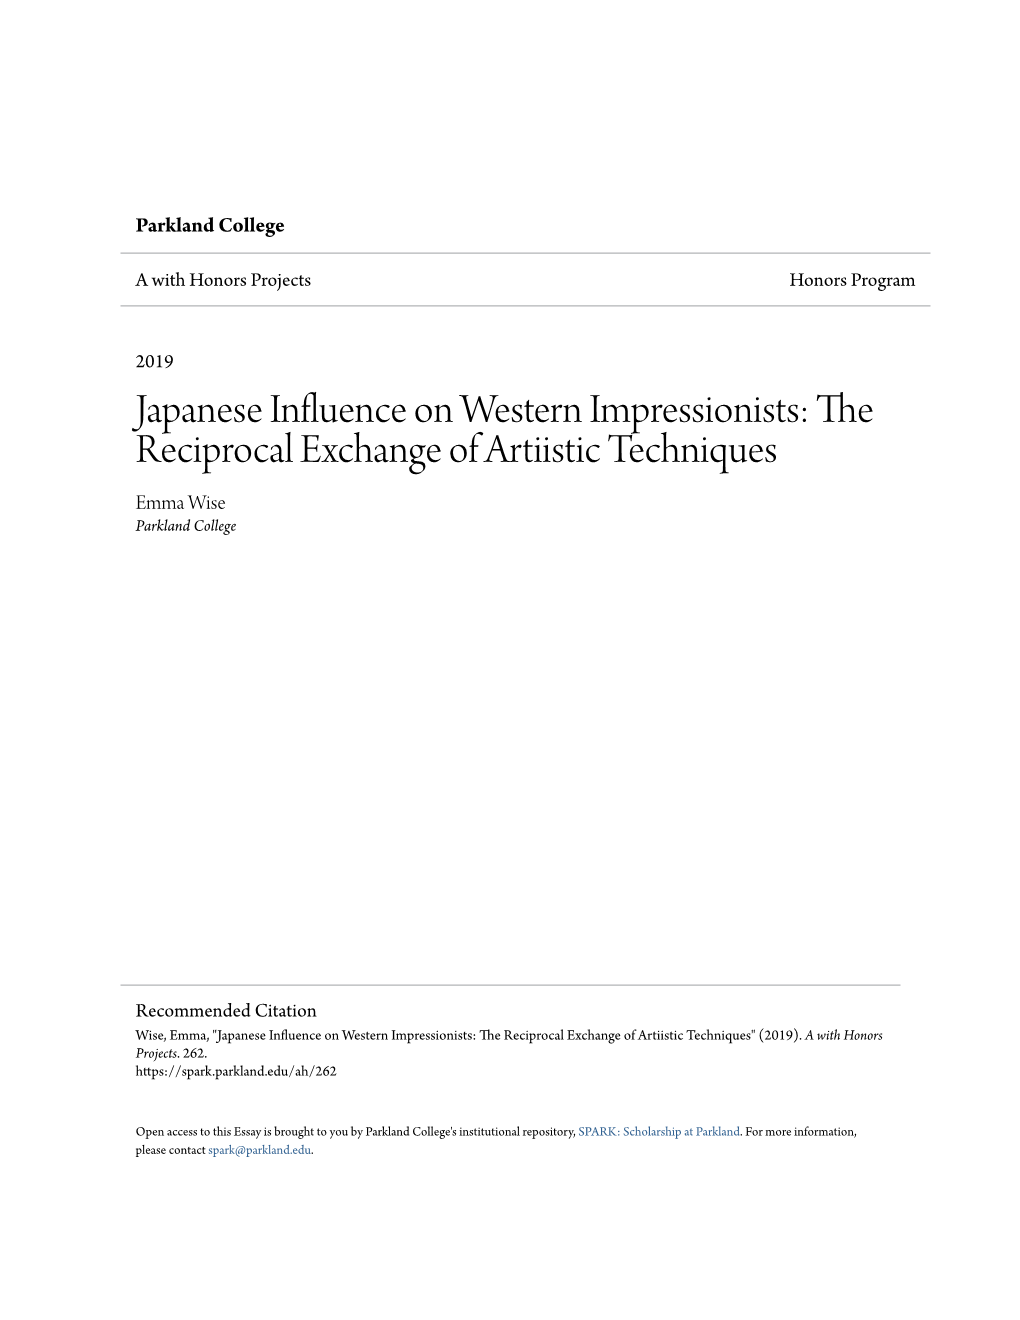 Japanese Influence on Western Impressionists: the Reciprocal Exchange of Artiistic Techniques Emma Wise Parkland College